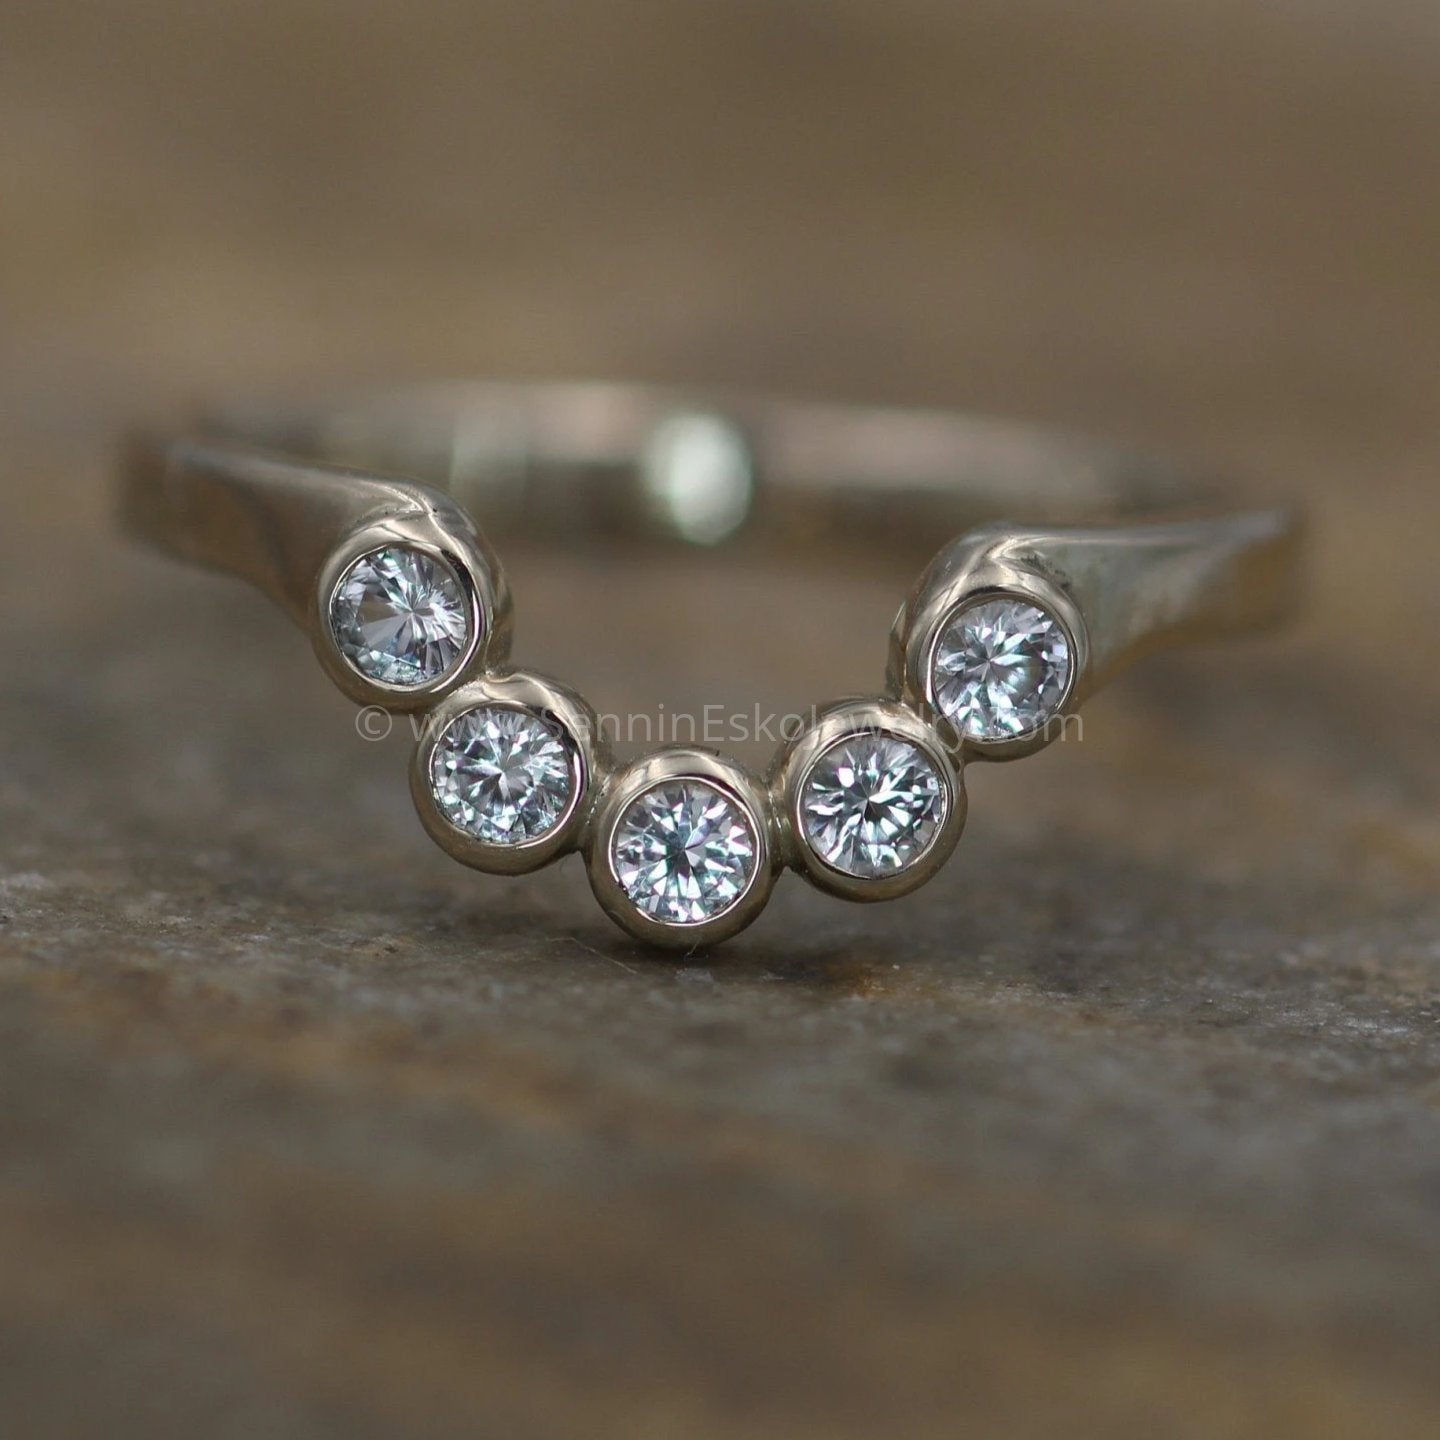 White Sapphire Engagement Rings: What You Need to Know - Brilliant Earth  Blog